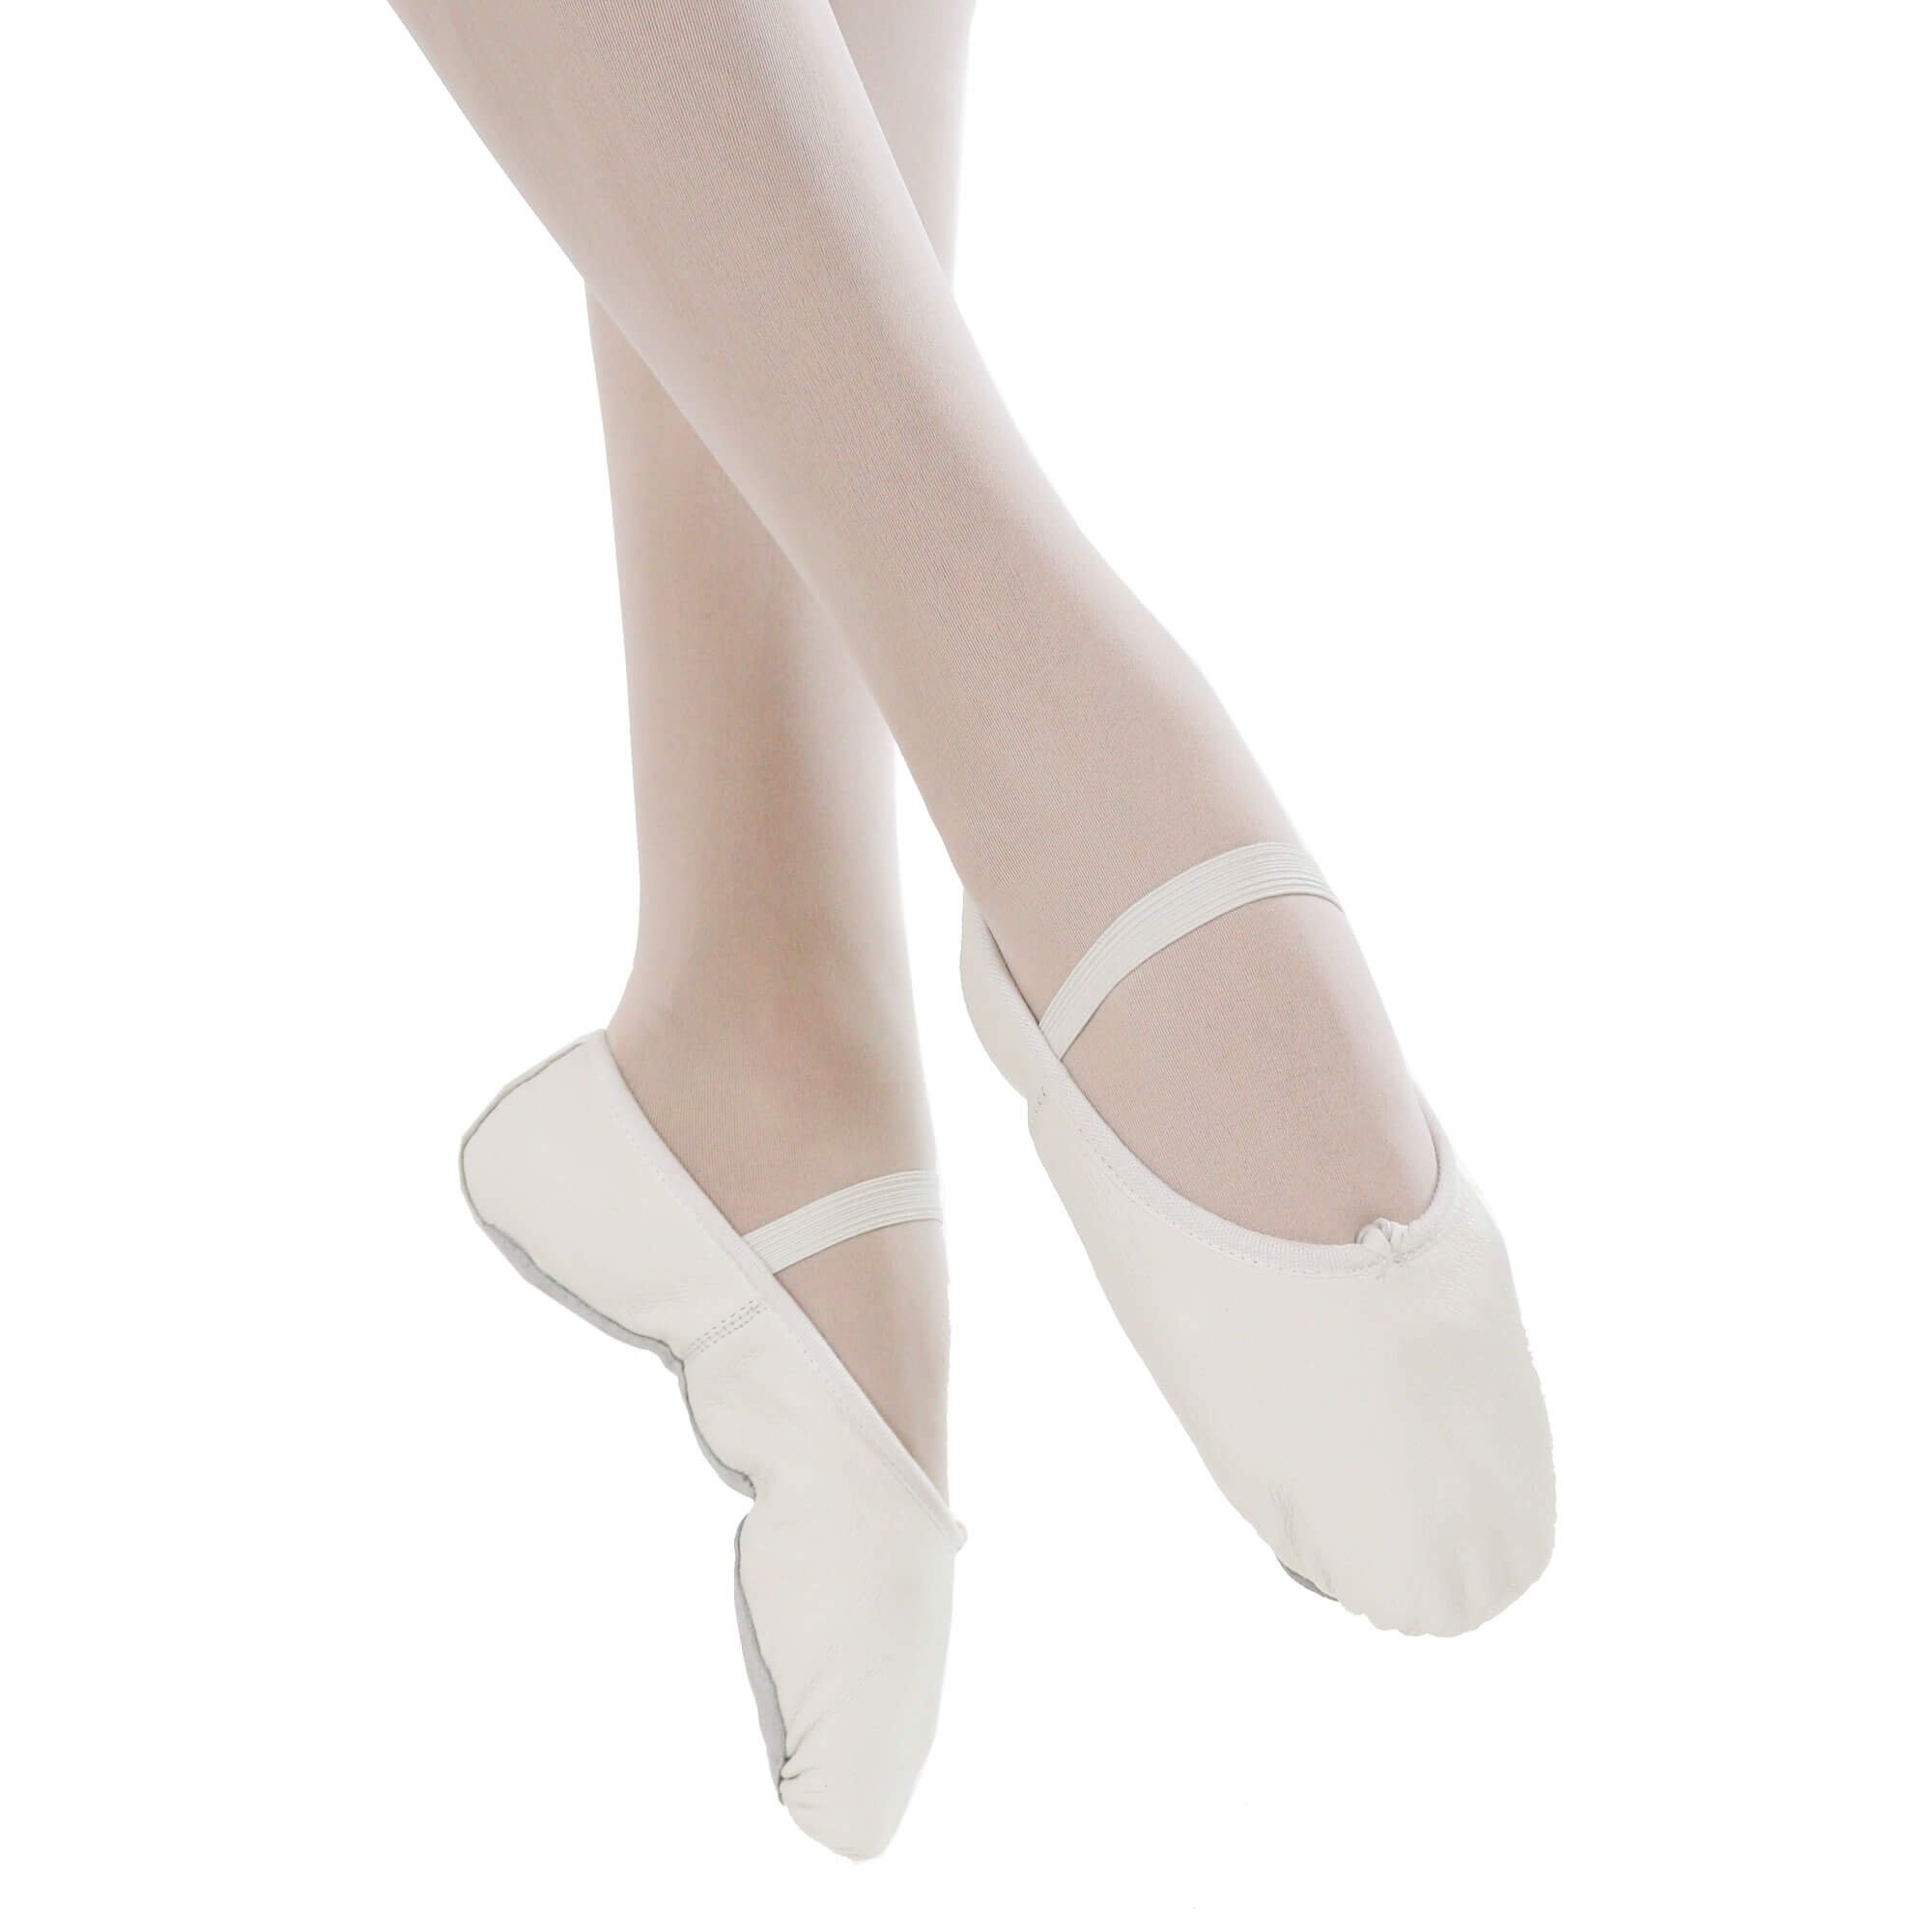 Danzcue Adult Full Sole Leather Ballet Slipper - Click Image to Close